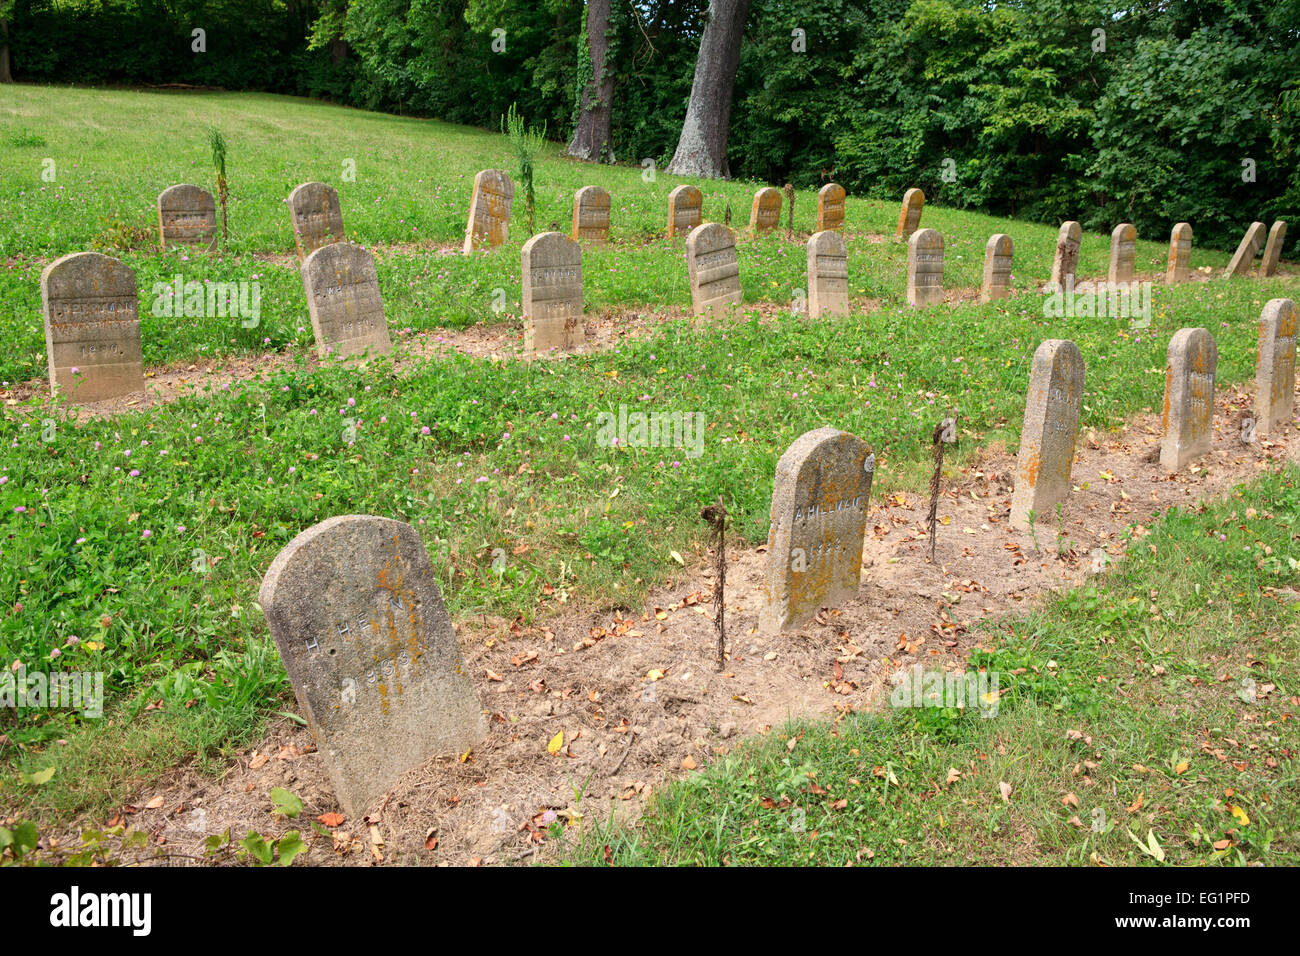 Grave markers of children from an orphanage. Stock Photo